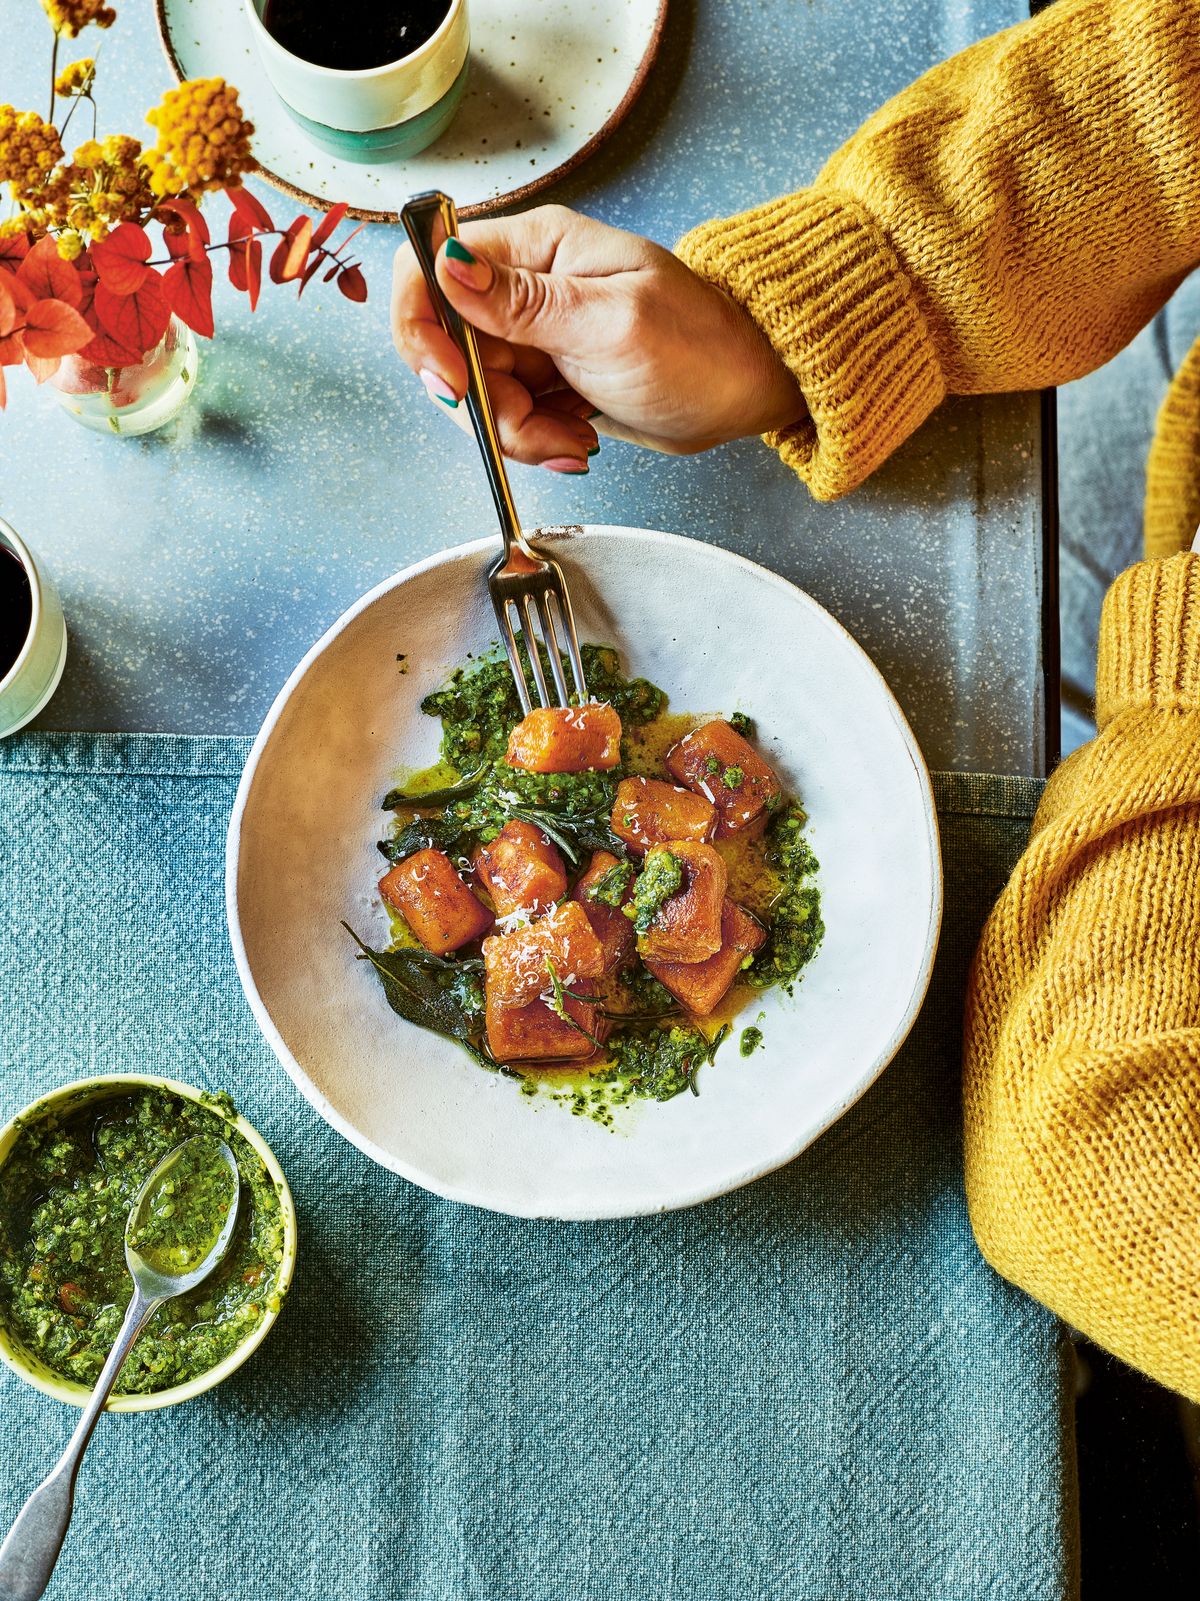 Pan-fried Pumpkin Gnocchi with Brown Herb Butter and Kale and Almond Pesto